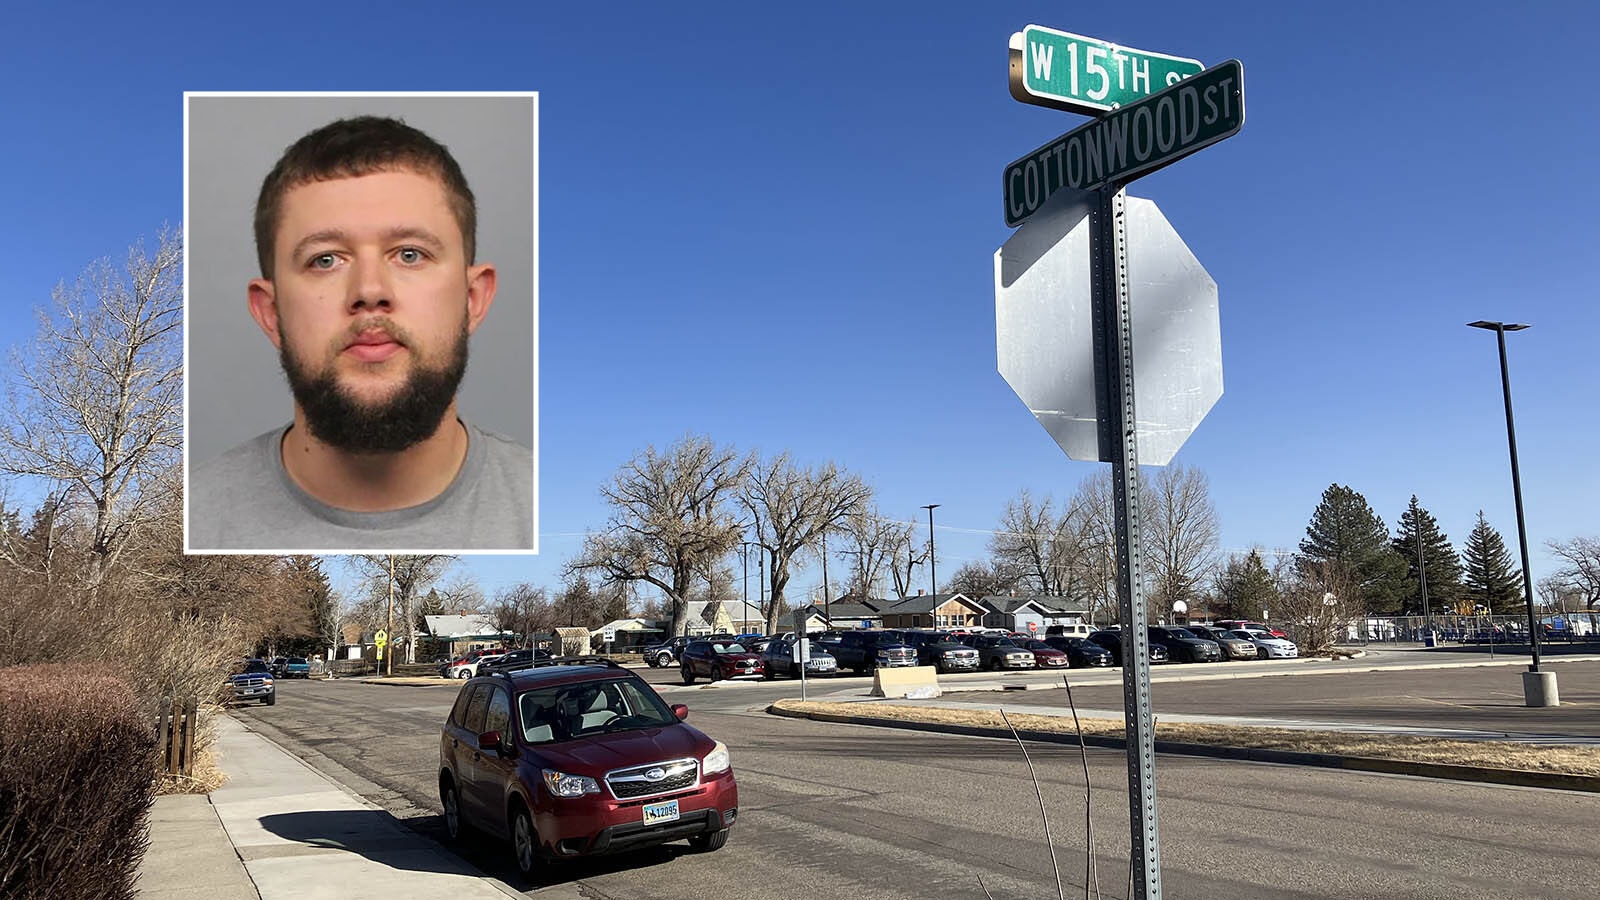 Rajion Vu is accused of shooting and killing a man in a drug deal gone bad near this intersection in Casper.